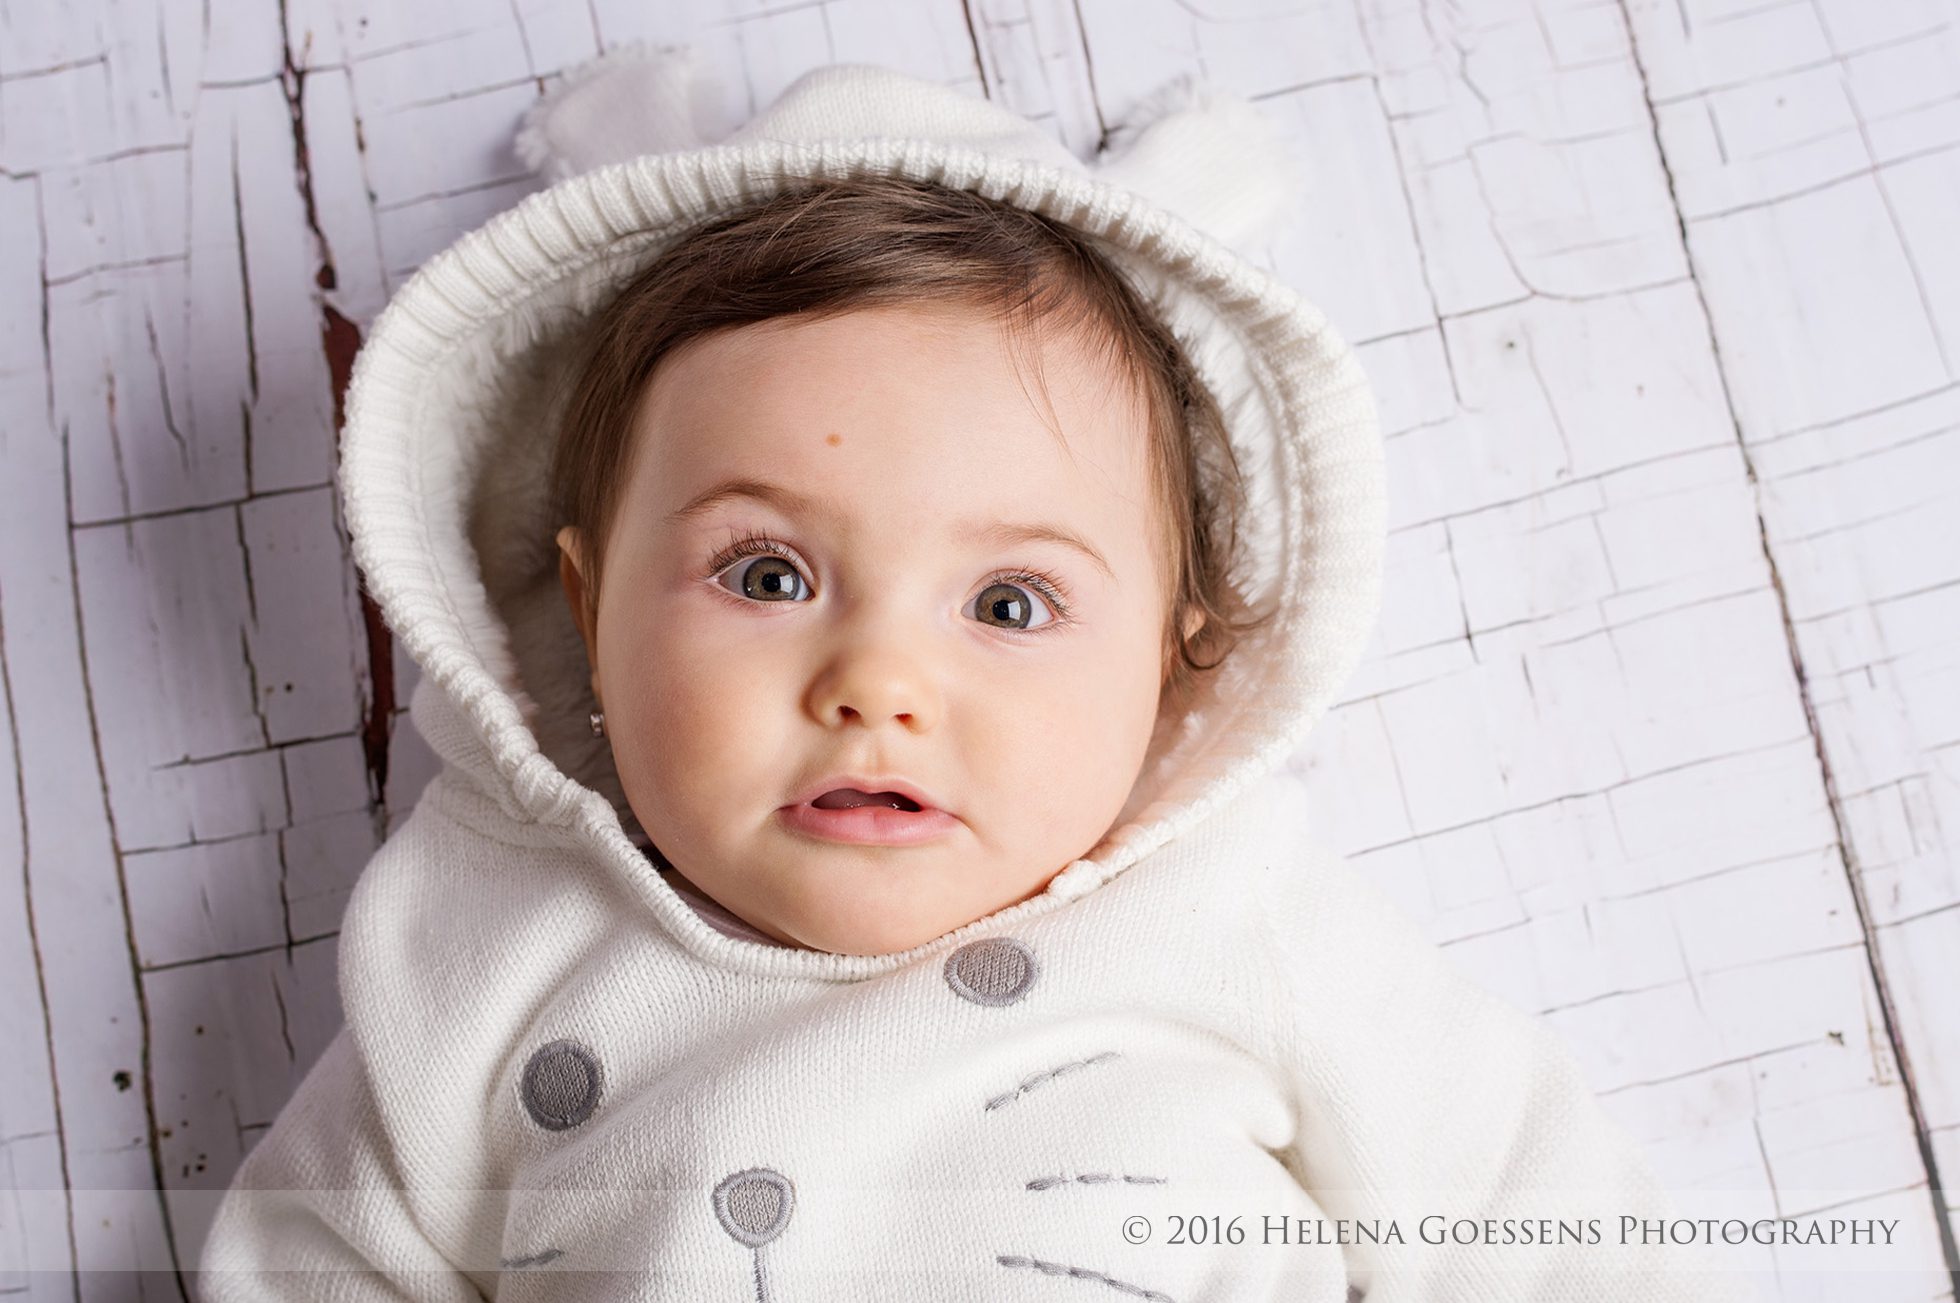 Baby in white outfit with big green eyes